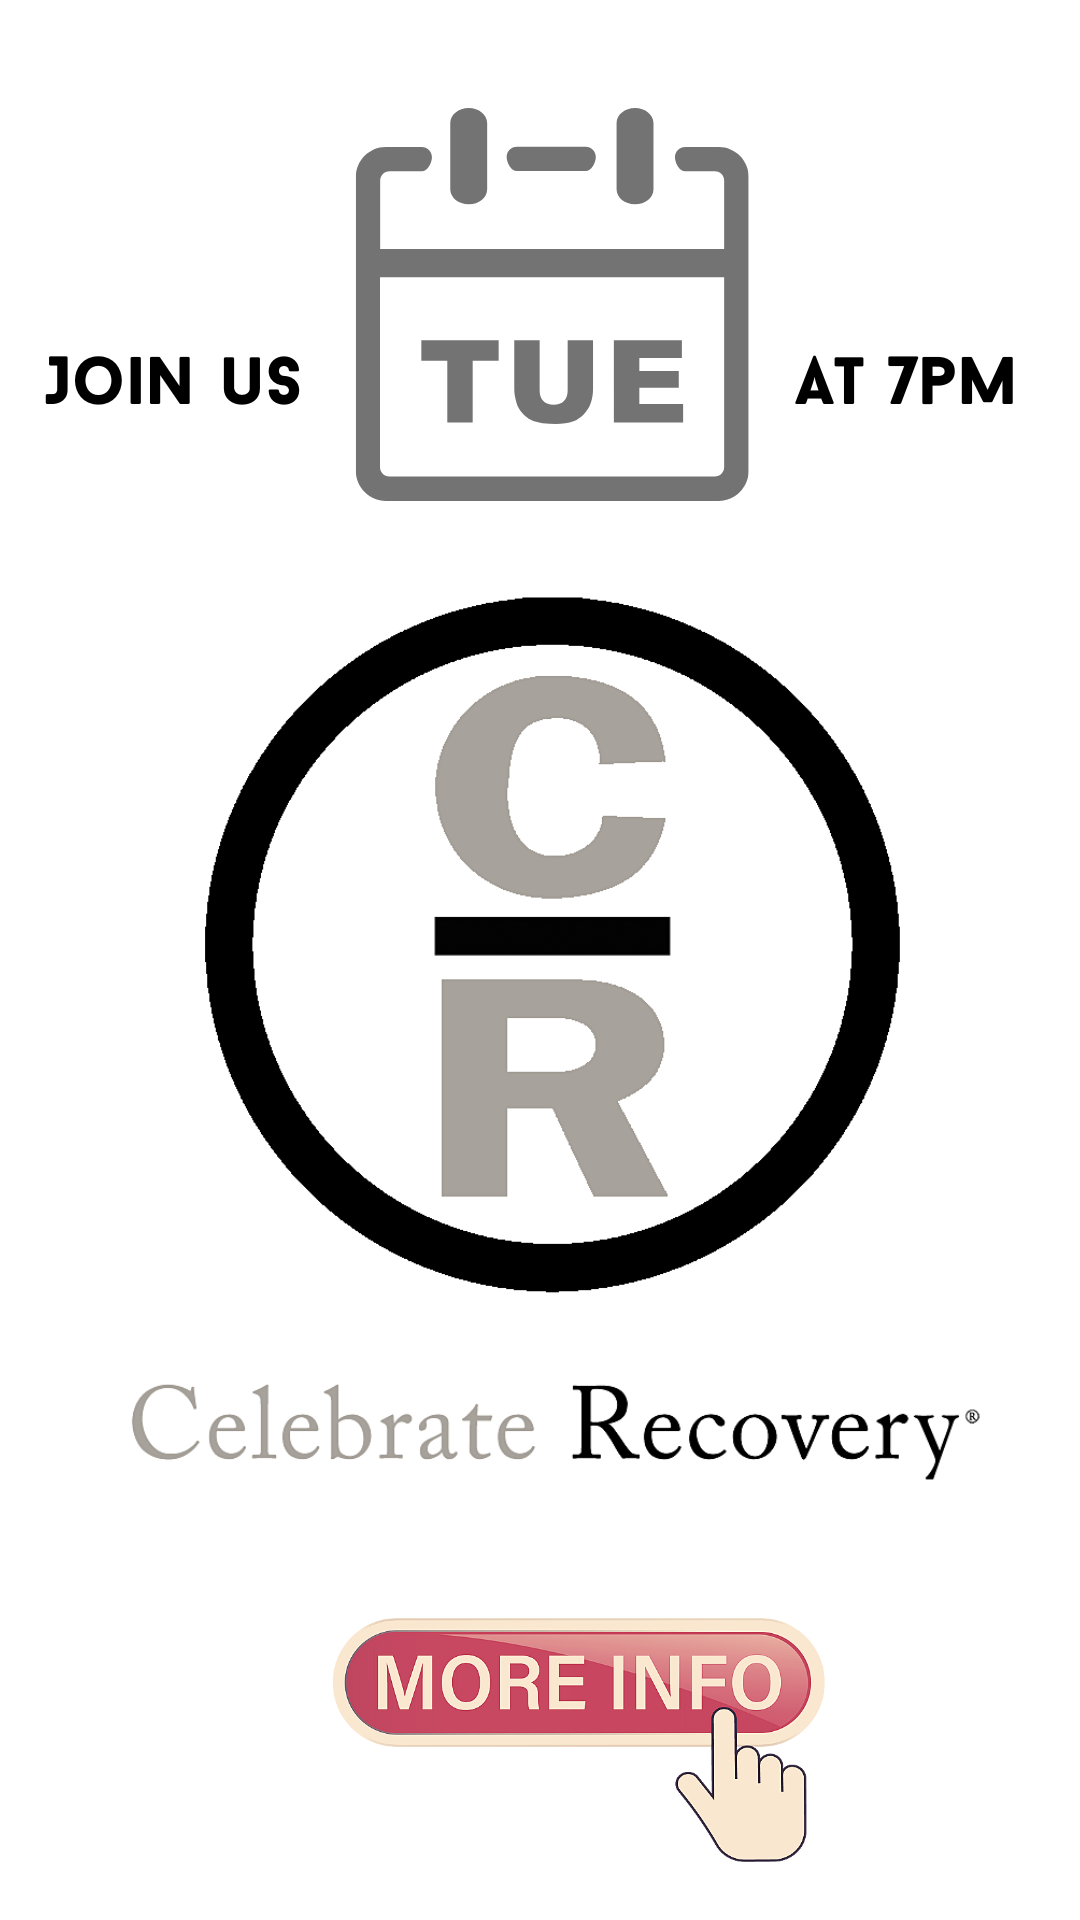 Celebrate recovery is a biblically balanced approach to help bring sustainable recovery and healing to our hurts.